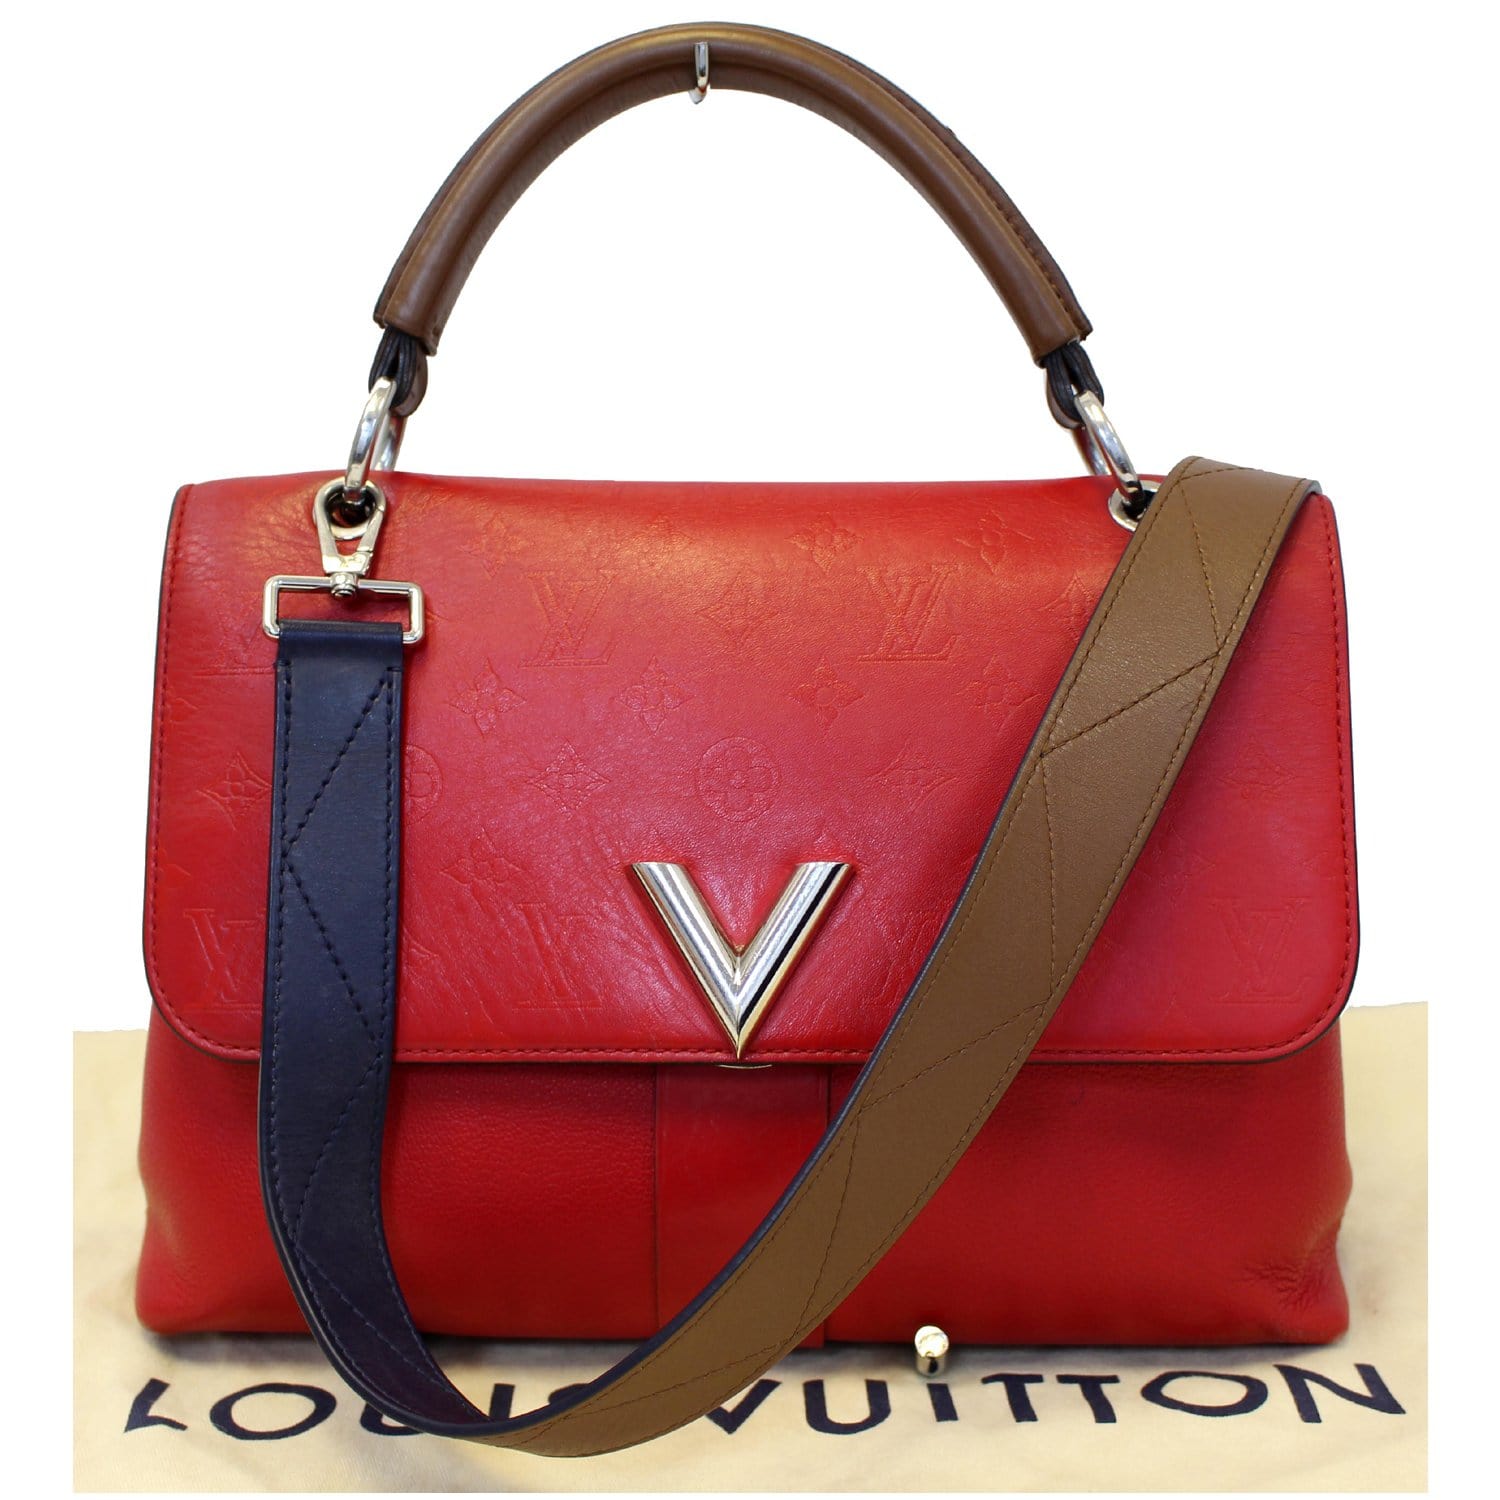 Louis Vuitton very one handle bag in rubios limited edition reversible strap